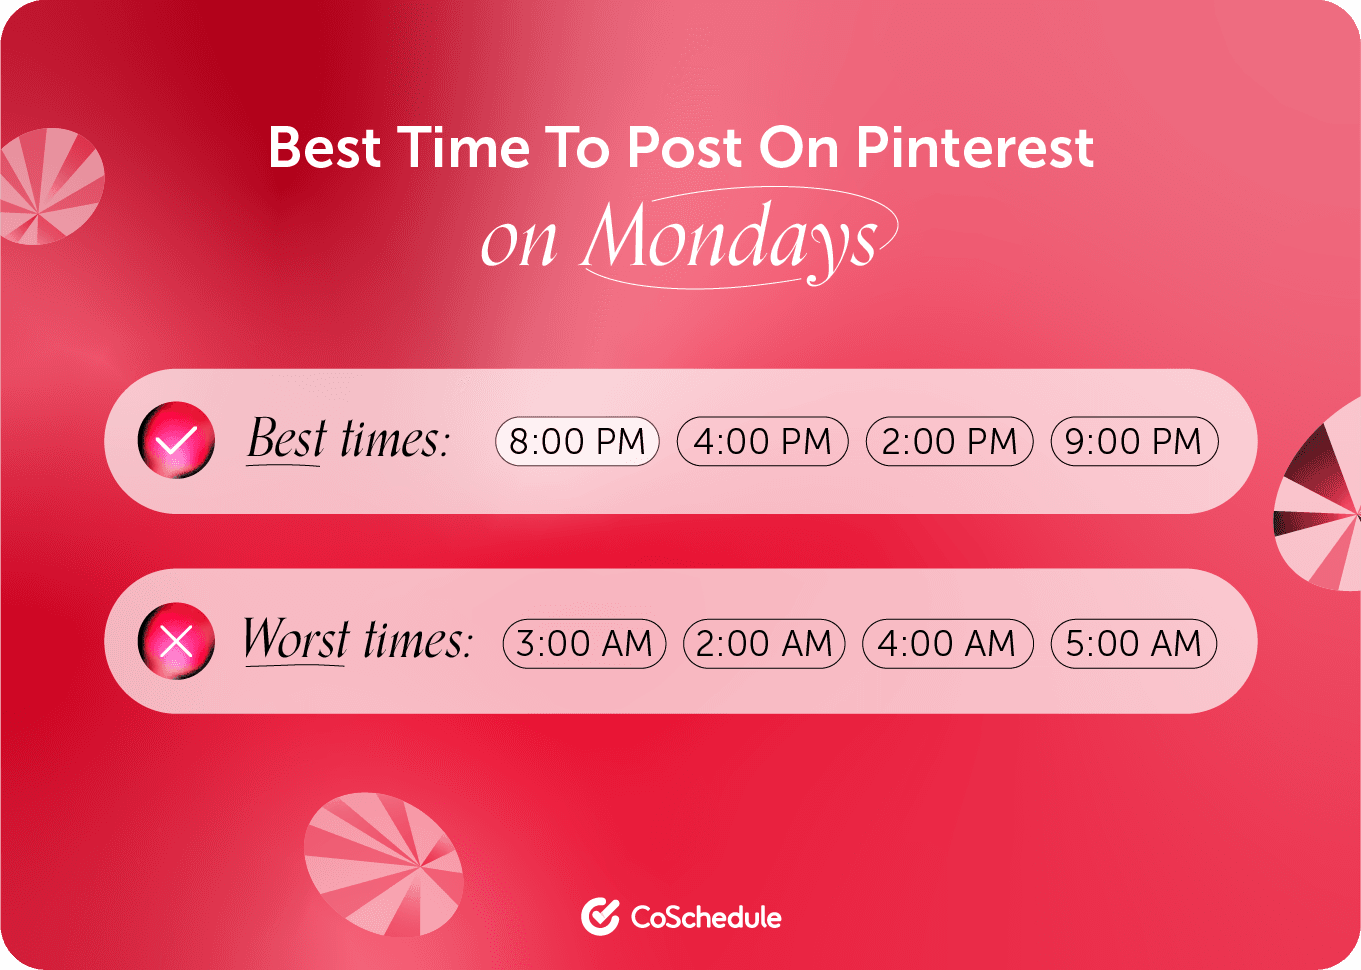 CoSchedule graphic on the best times to post on Pinterest Mondays